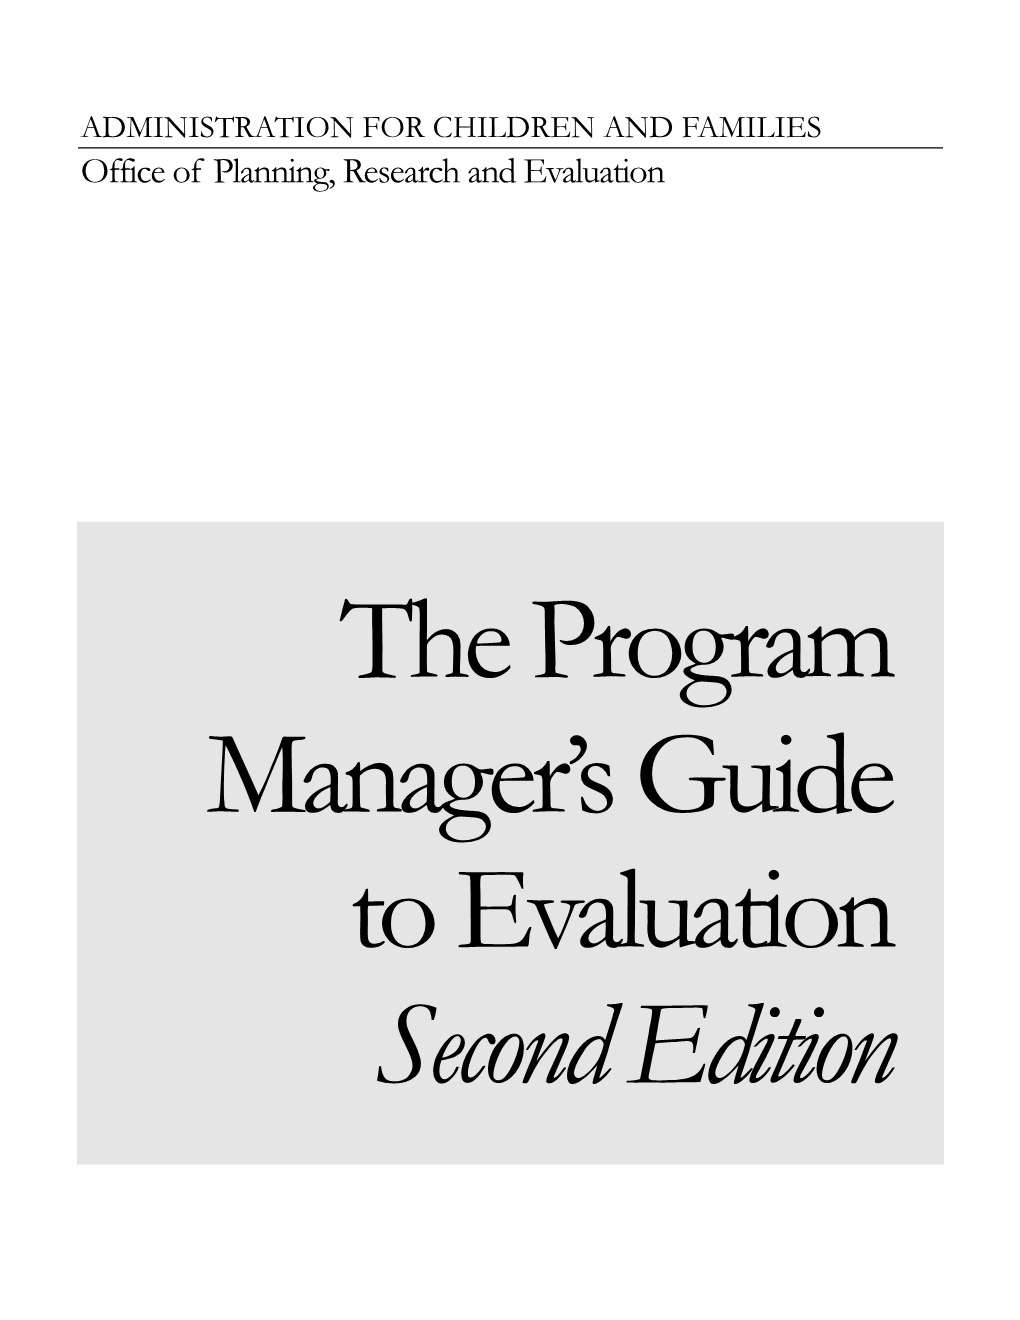 The Program Manager's Guide to Evaluation, Second Edition